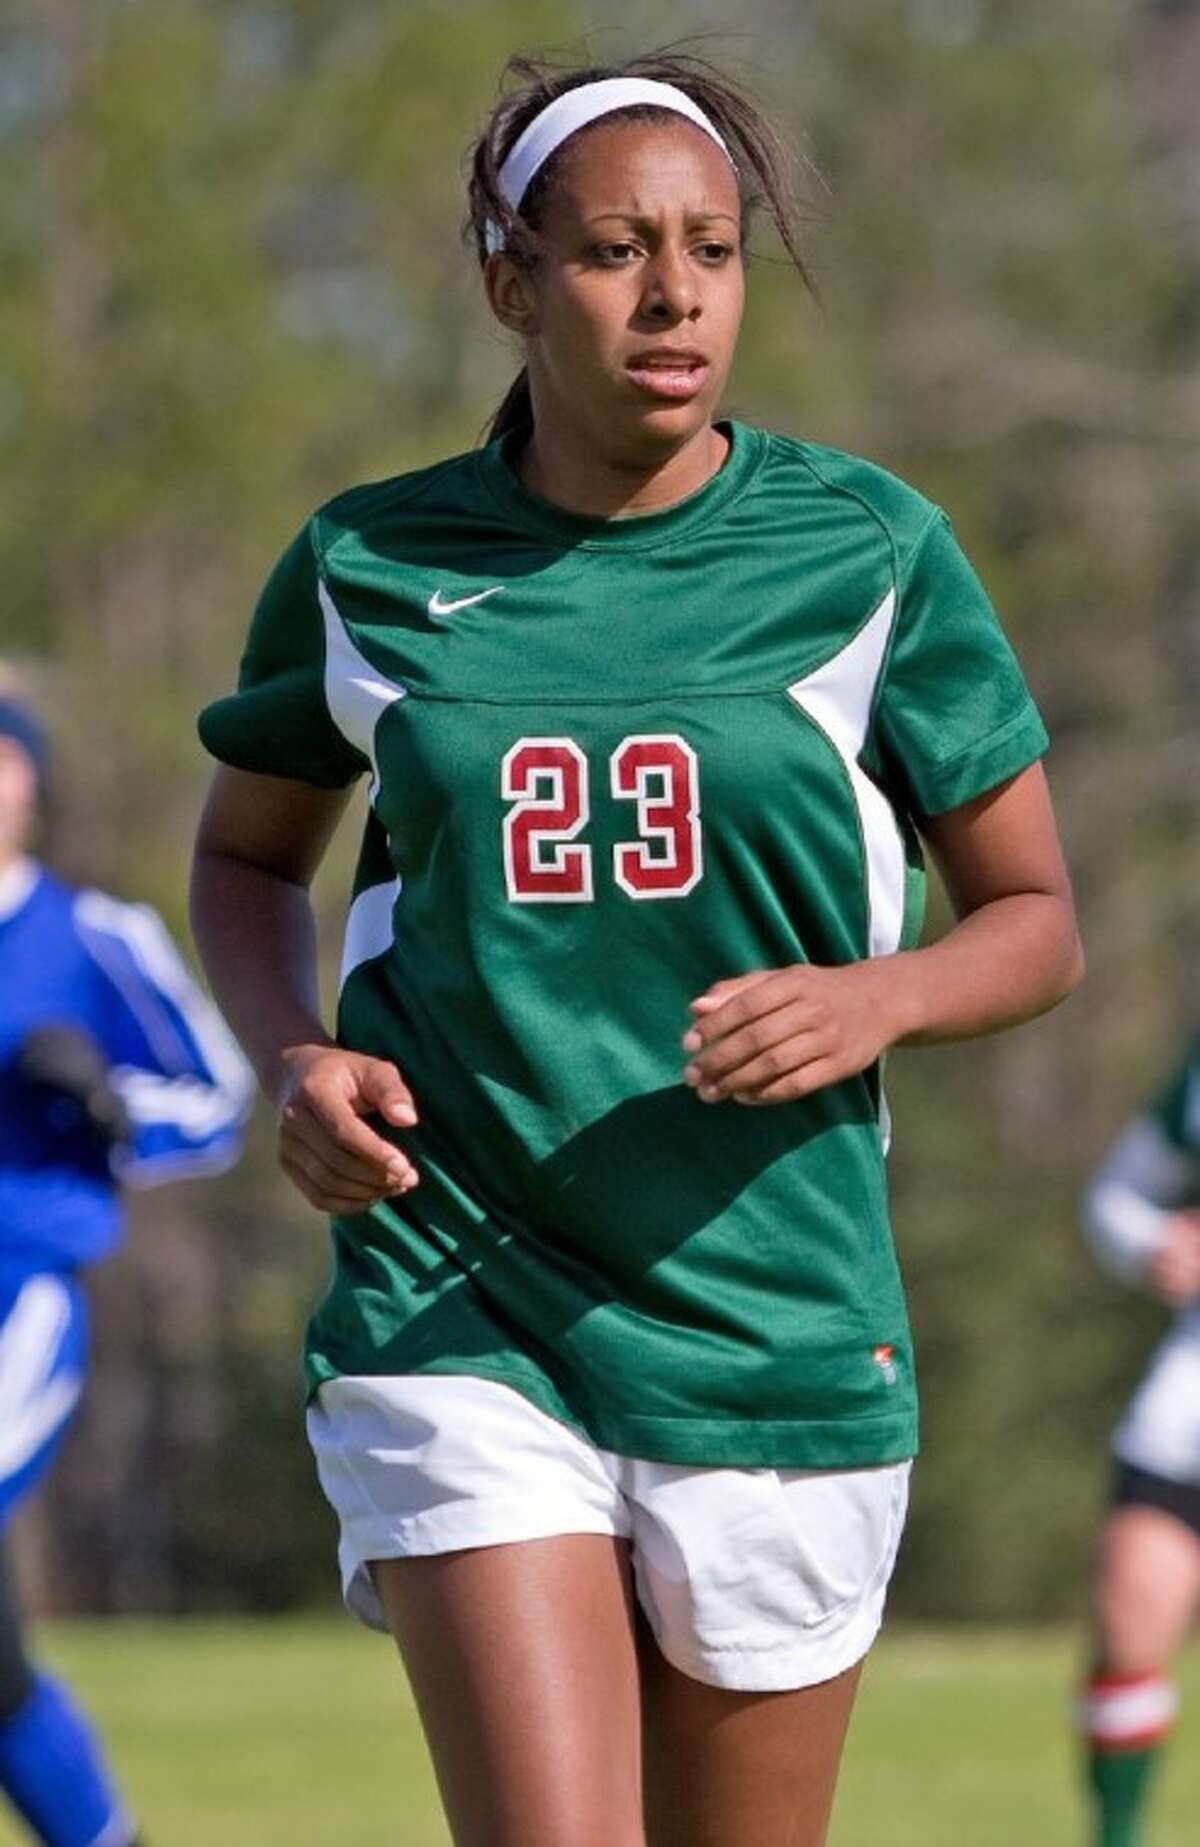 The Woodlands senior defender Lexi Ricketts played her first high school game in almost a year last Thursday, when the Lady Highlanders topped Cypress Creek 3-1 in their opener at the Lady Highlander Invitational.